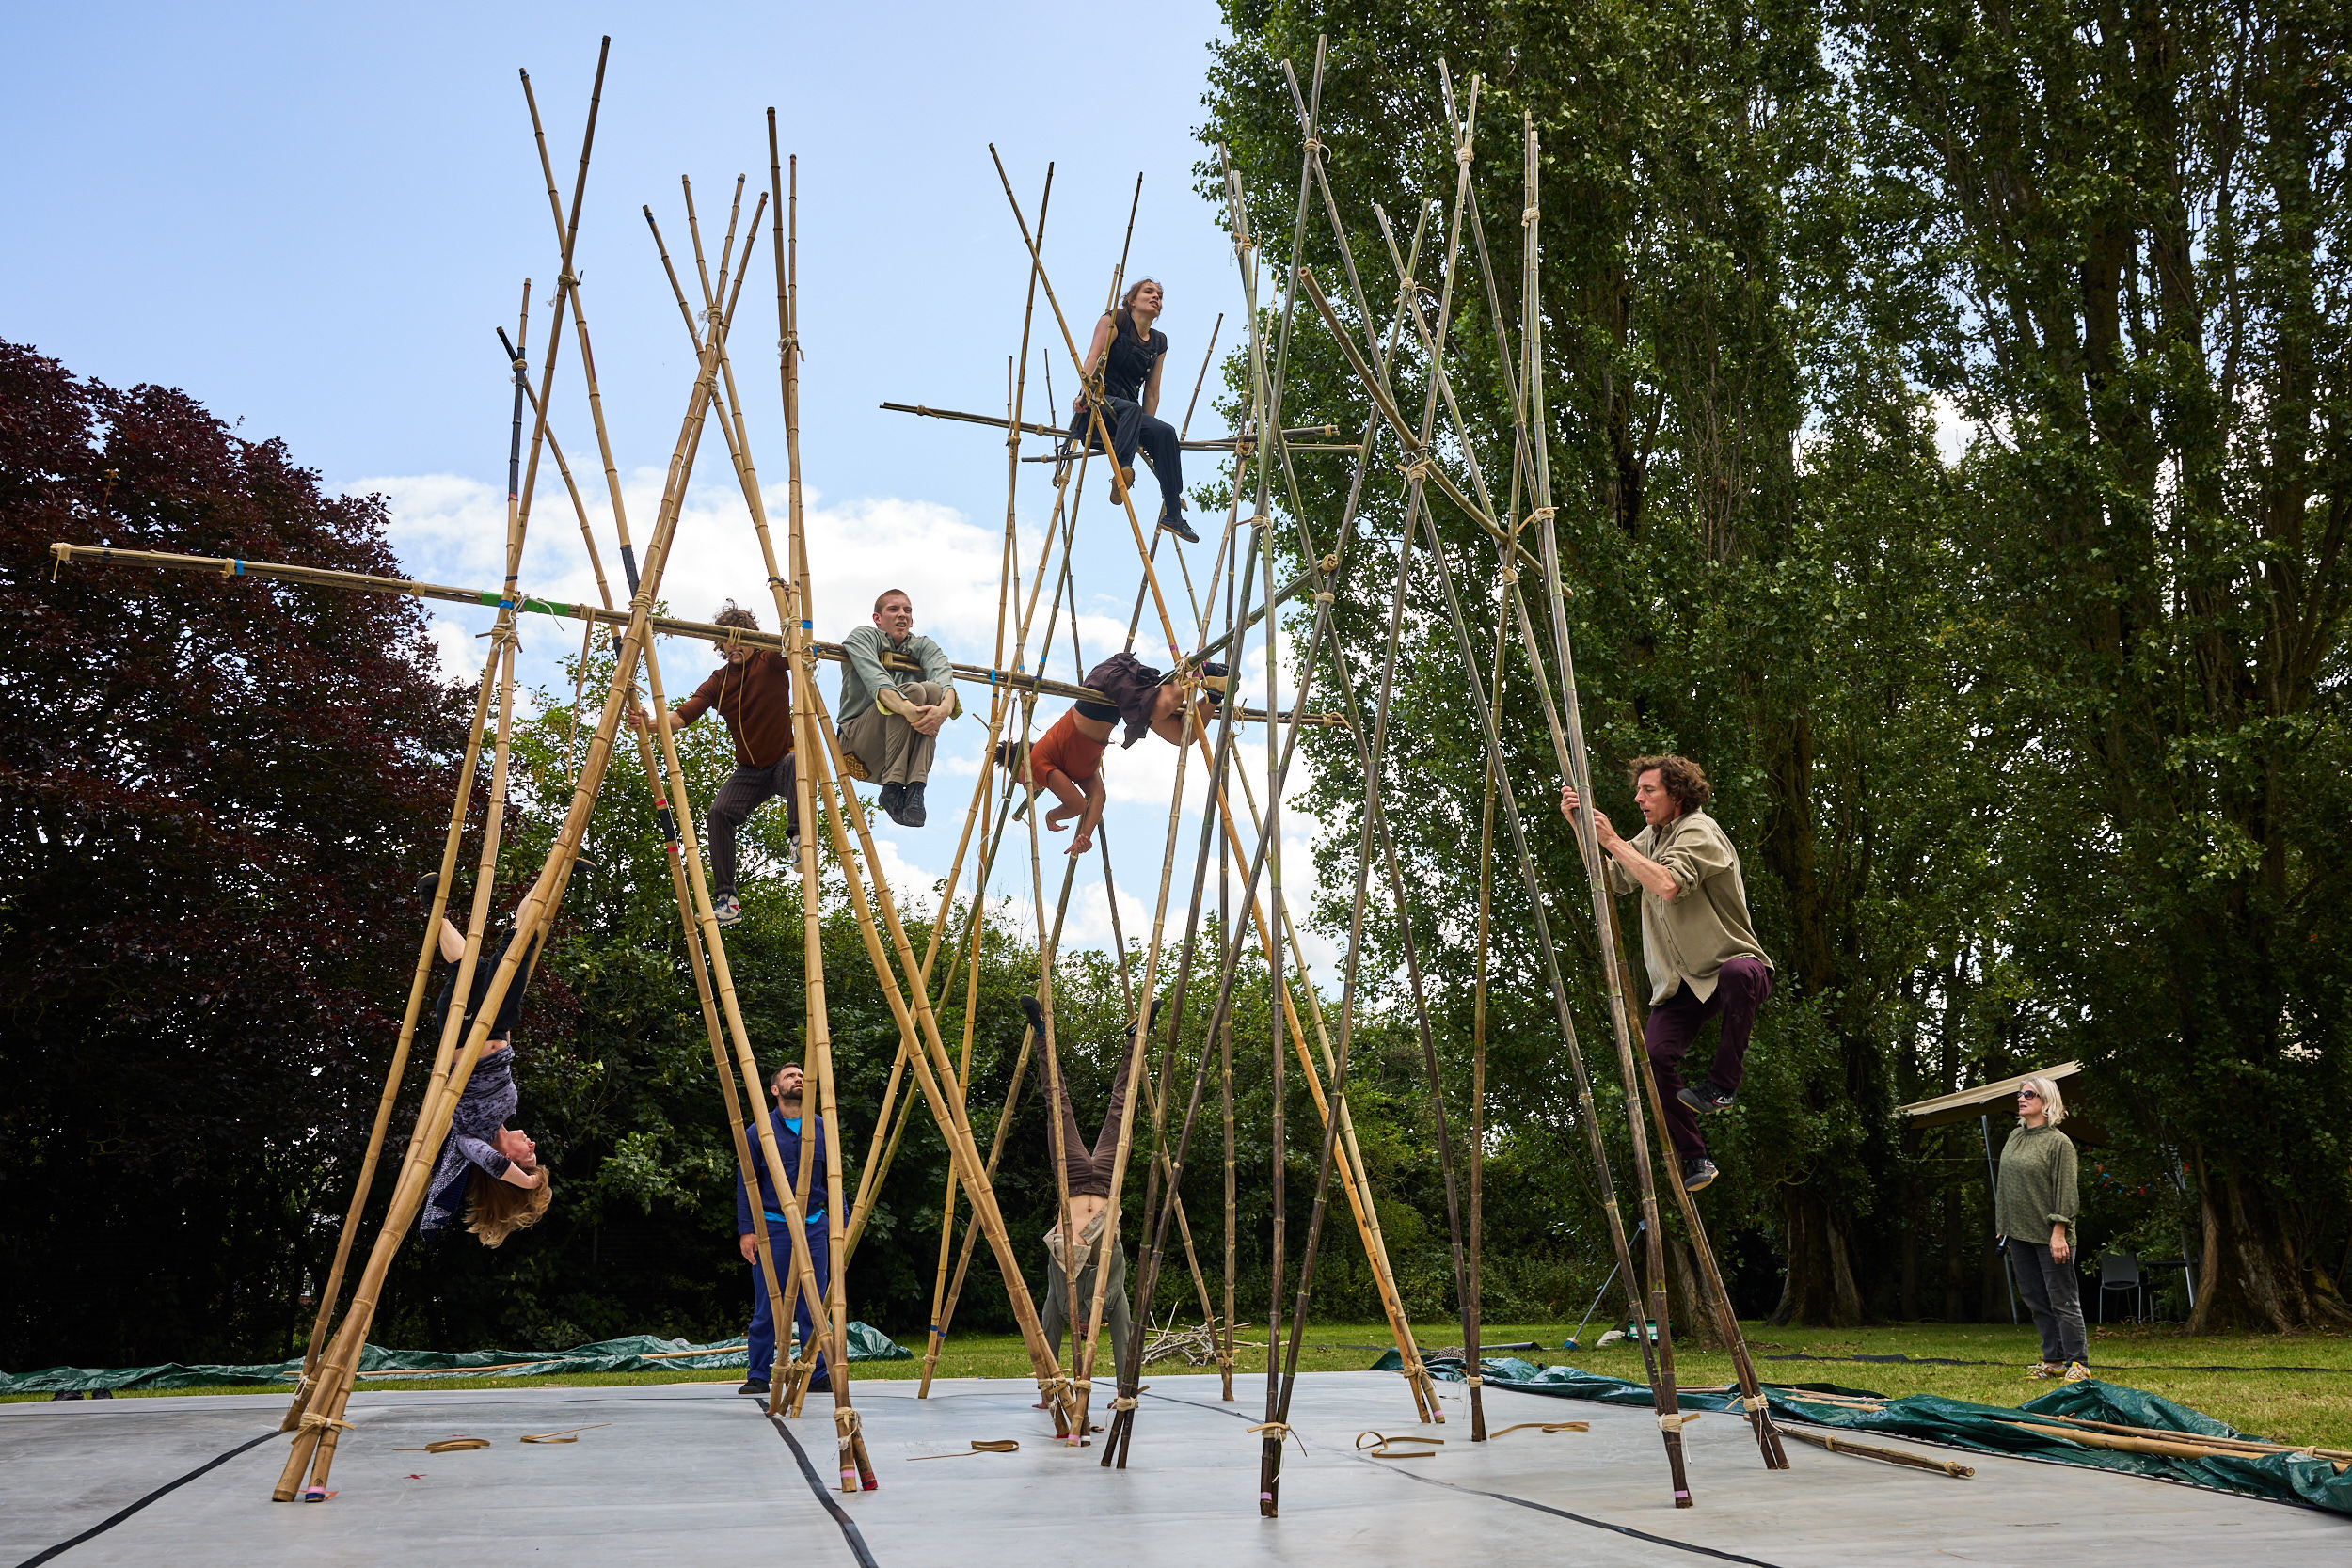 Circus artists climb over a 10m tall structure made of bamboo